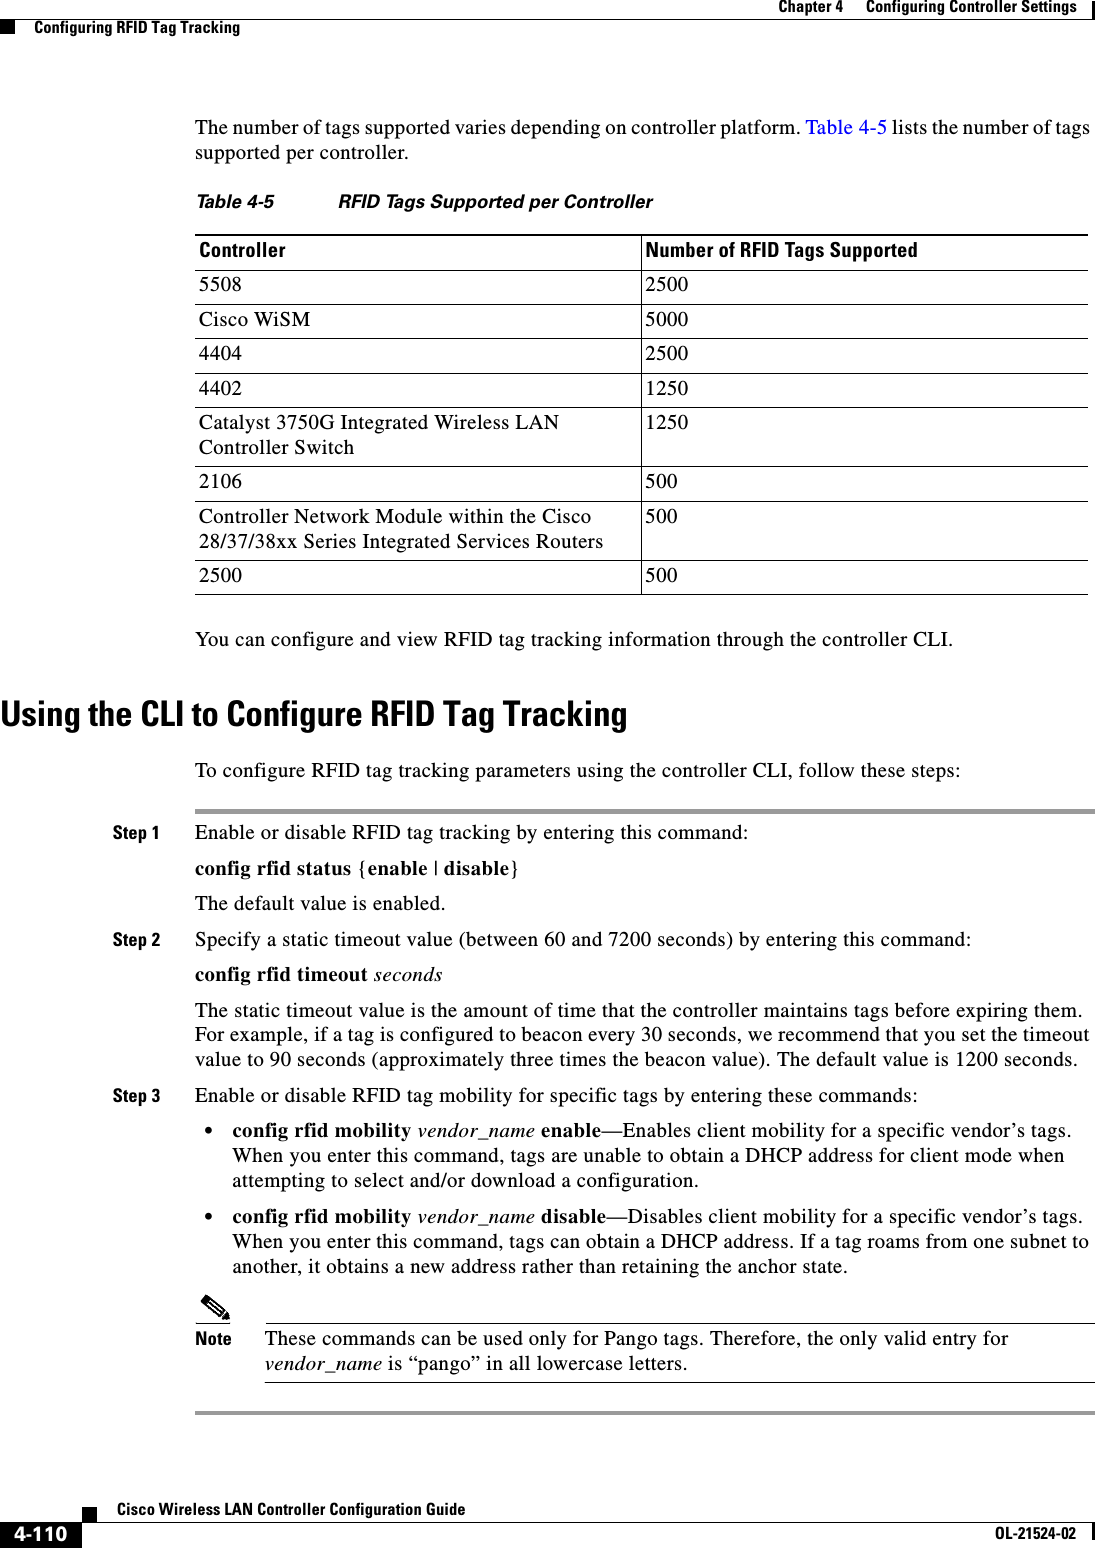  4-110Cisco Wireless LAN Controller Configuration GuideOL-21524-02Chapter 4      Configuring Controller SettingsConfiguring RFID Tag TrackingThe number of tags supported varies depending on controller platform. Table 4-5 lists the number of tags supported per controller.You can configure and view RFID tag tracking information through the controller CLI.Using the CLI to Configure RFID Tag TrackingTo configure RFID tag tracking parameters using the controller CLI, follow these steps:Step 1 Enable or disable RFID tag tracking by entering this command:config rfid status {enable | disable}The default value is enabled.Step 2 Specify a static timeout value (between 60 and 7200 seconds) by entering this command:config rfid timeout secondsThe static timeout value is the amount of time that the controller maintains tags before expiring them. For example, if a tag is configured to beacon every 30 seconds, we recommend that you set the timeout value to 90 seconds (approximately three times the beacon value). The default value is 1200 seconds.Step 3 Enable or disable RFID tag mobility for specific tags by entering these commands:  • config rfid mobility vendor_name enable—Enables client mobility for a specific vendor’s tags. When you enter this command, tags are unable to obtain a DHCP address for client mode when attempting to select and/or download a configuration.  • config rfid mobility vendor_name disable—Disables client mobility for a specific vendor’s tags. When you enter this command, tags can obtain a DHCP address. If a tag roams from one subnet to another, it obtains a new address rather than retaining the anchor state.Note These commands can be used only for Pango tags. Therefore, the only valid entry for vendor_name is “pango” in all lowercase letters.Ta b l e  4-5 RFID Tags Supported per ControllerController Number of RFID Tags Supported5508 2500Cisco WiSM 50004404 25004402 1250Catalyst 3750G Integrated Wireless LAN Controller Switch12502106 500Controller Network Module within the Cisco 28/37/38xx Series Integrated Services Routers5002500 500